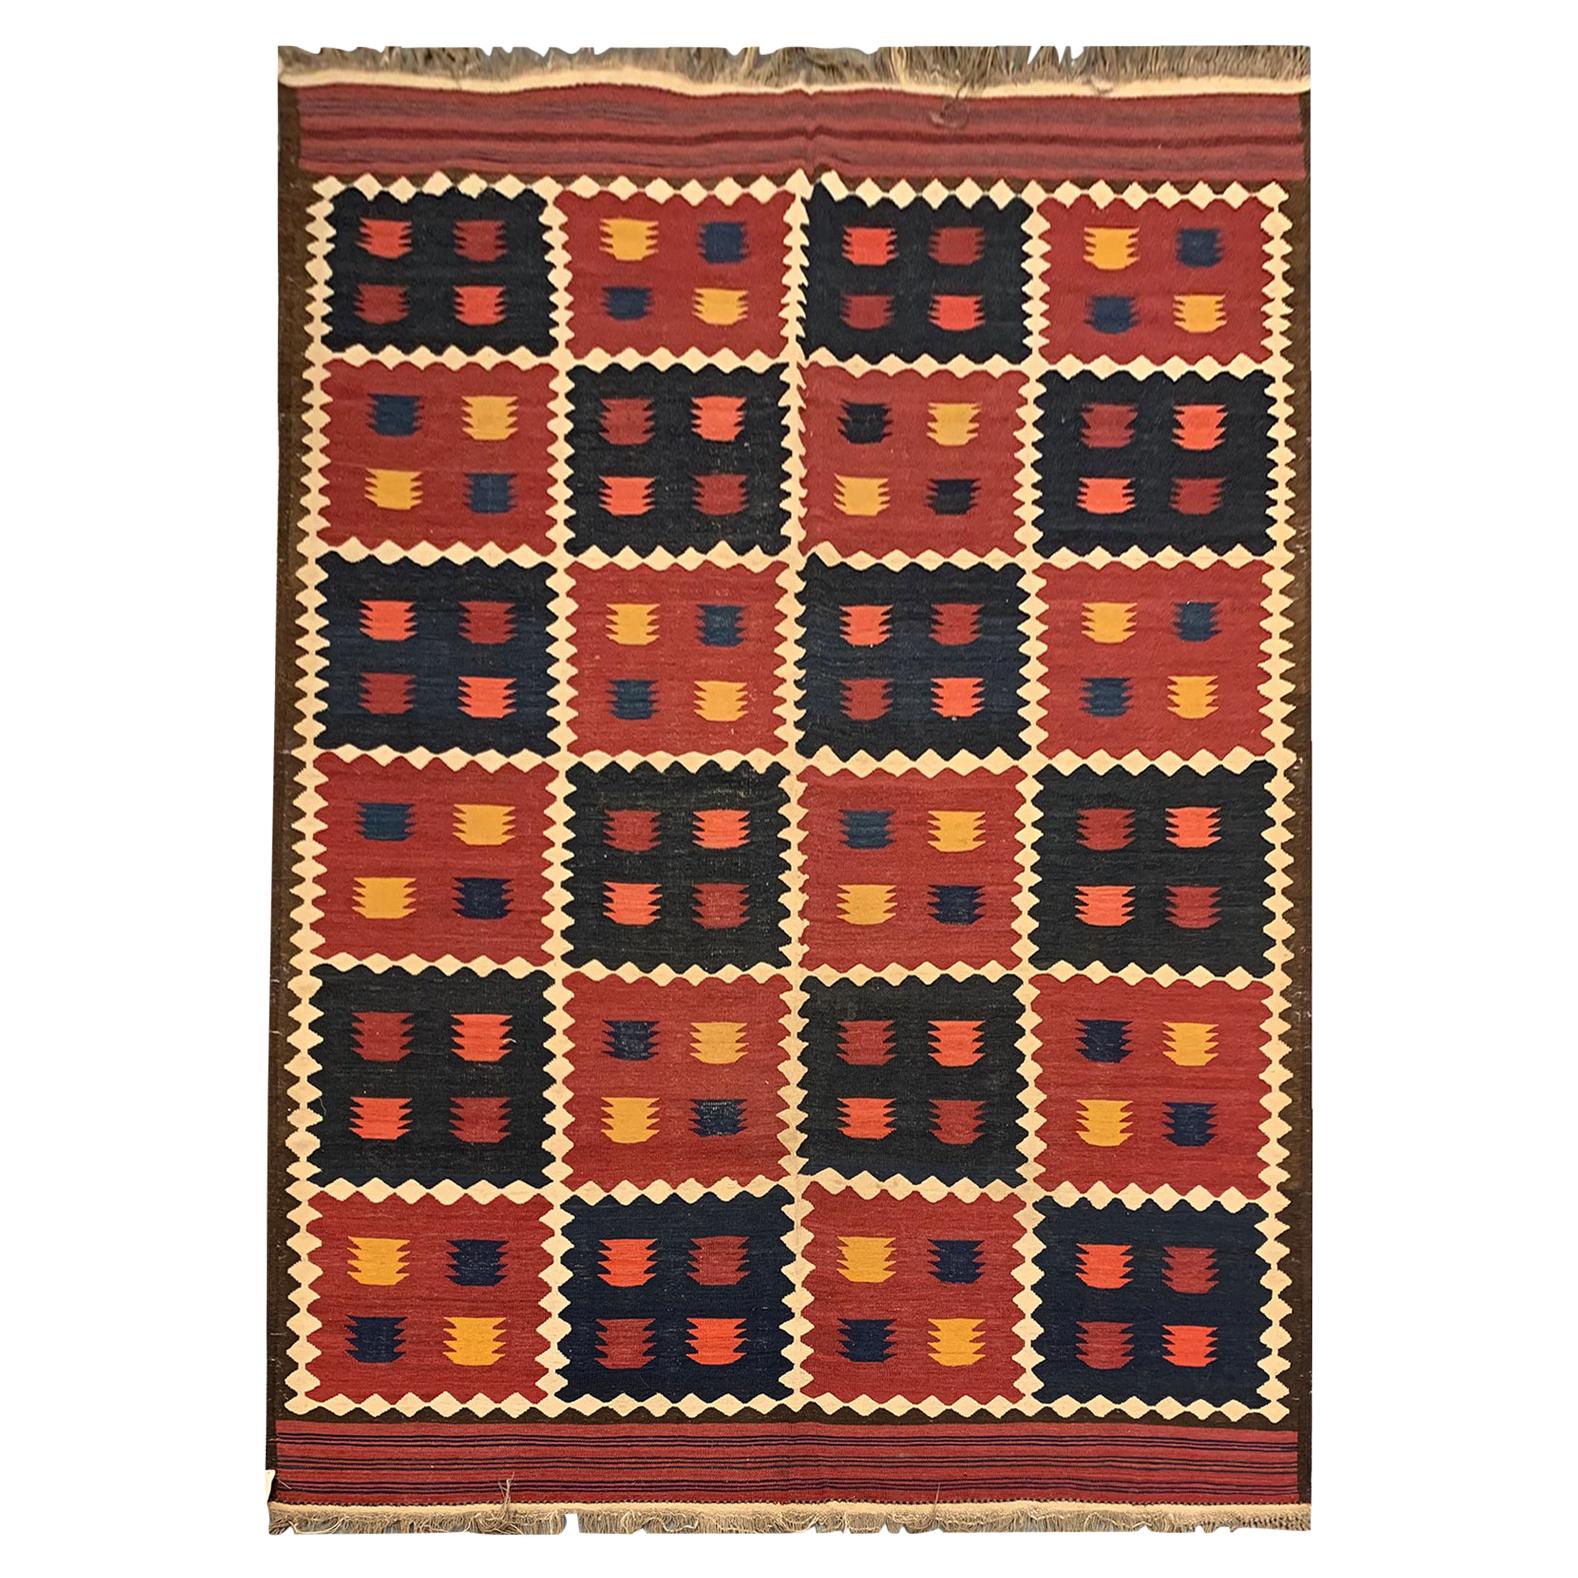 Antique Rugs Red Blue Wool Kilim Area Rug Flat-Woven Tribal Kilim For Sale